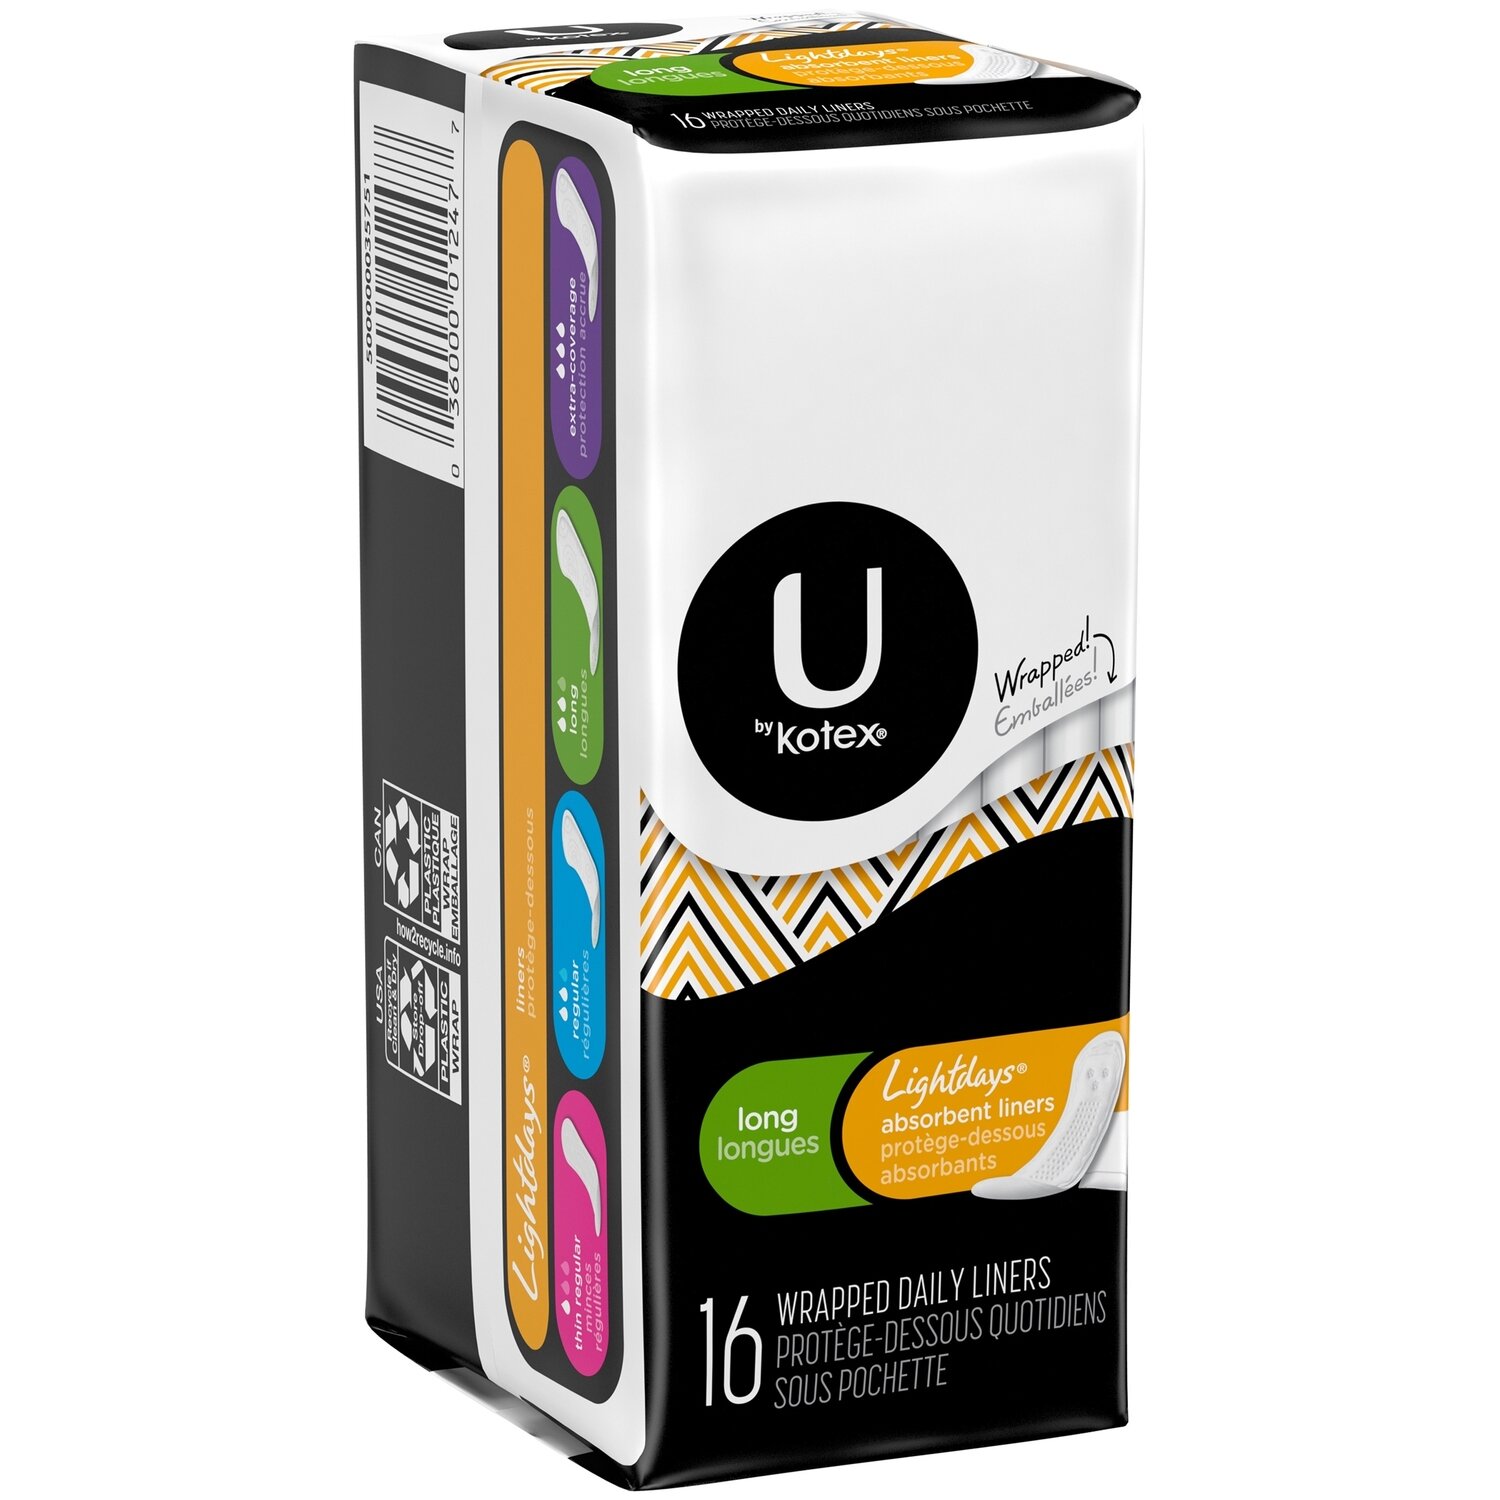 U by Kotex Security Lightdays Long Wrapped Daily Liners 16 ct